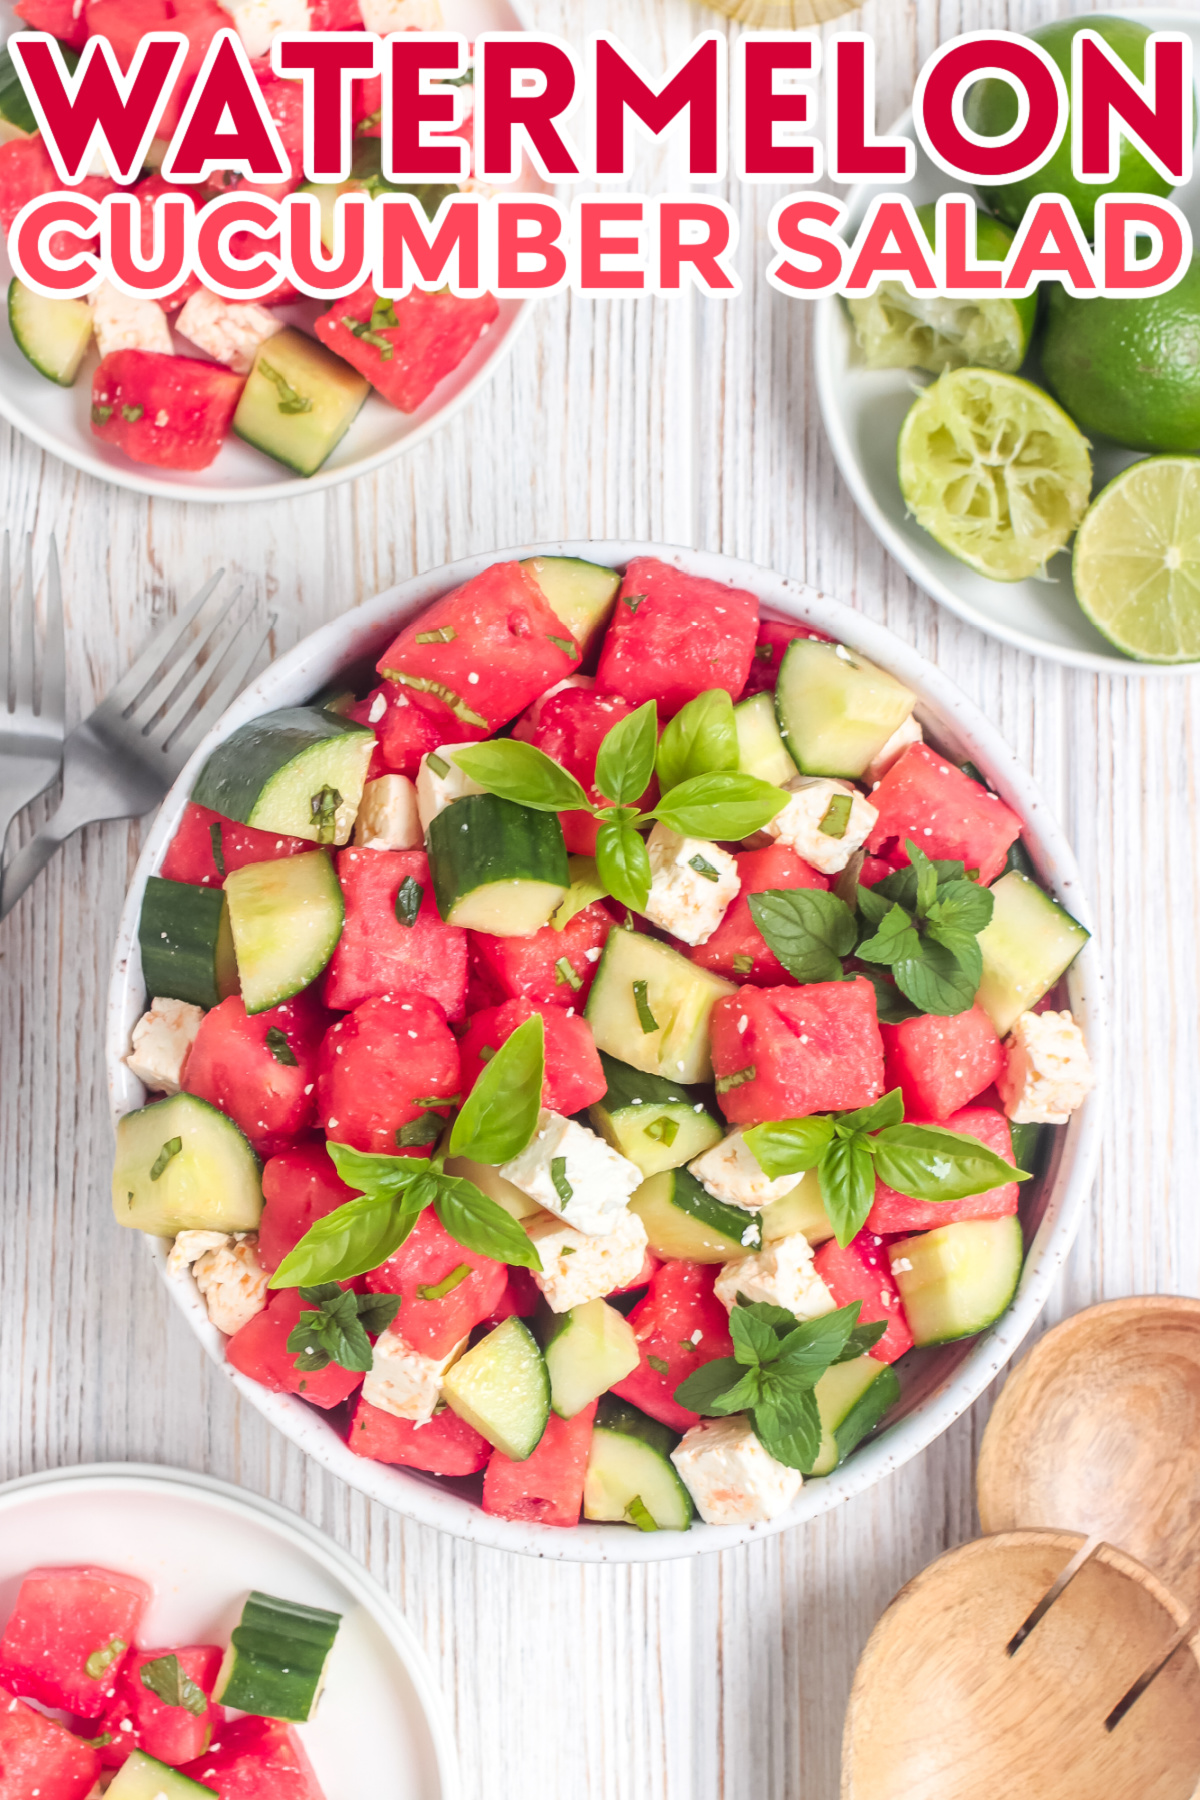 This watermelon cucumber salad with feta is the perfect refreshing side dish for summer potlucks, BBQs, and picnics!